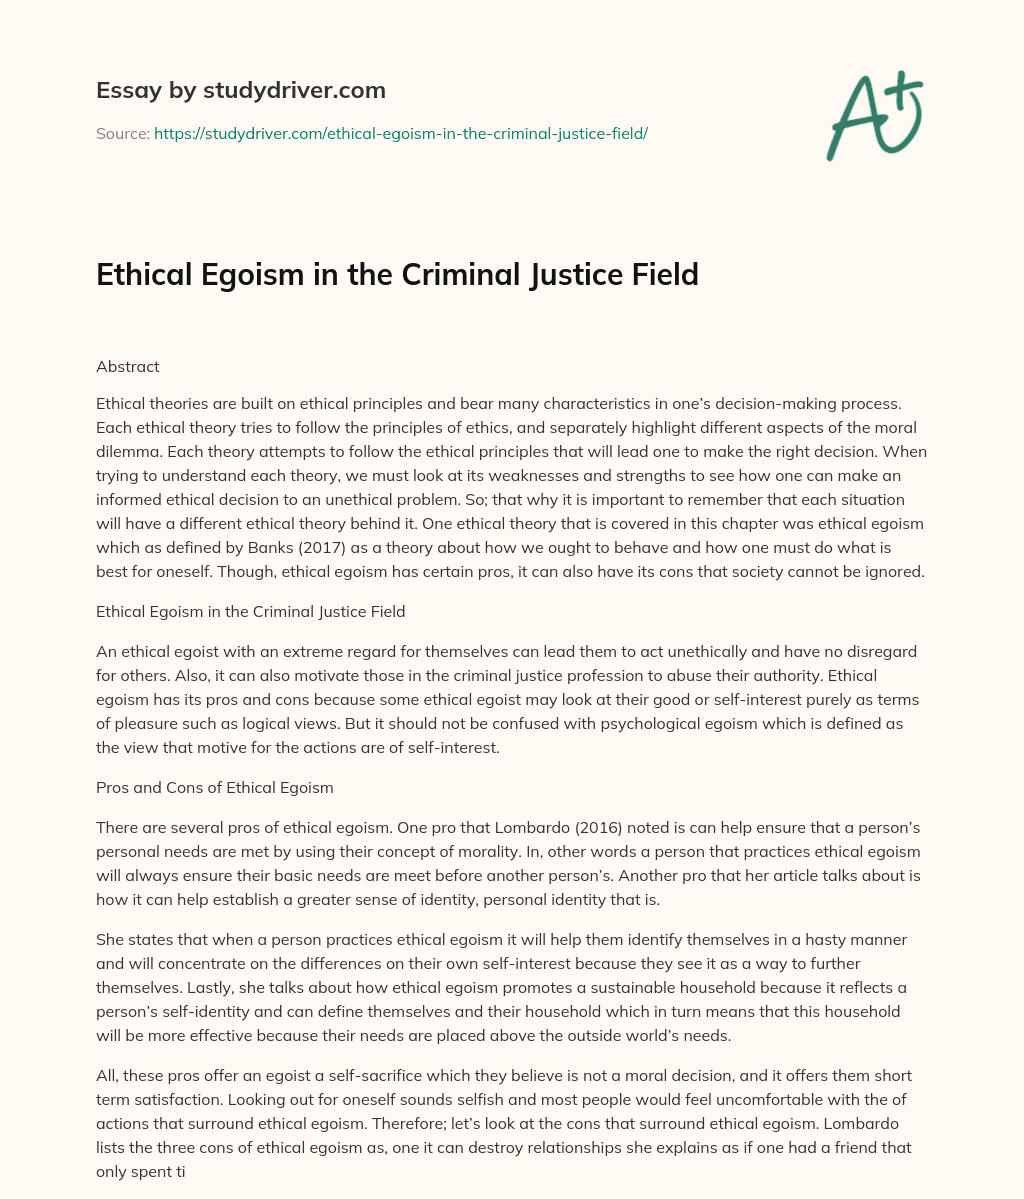 Ethical Egoism in the Criminal Justice Field essay